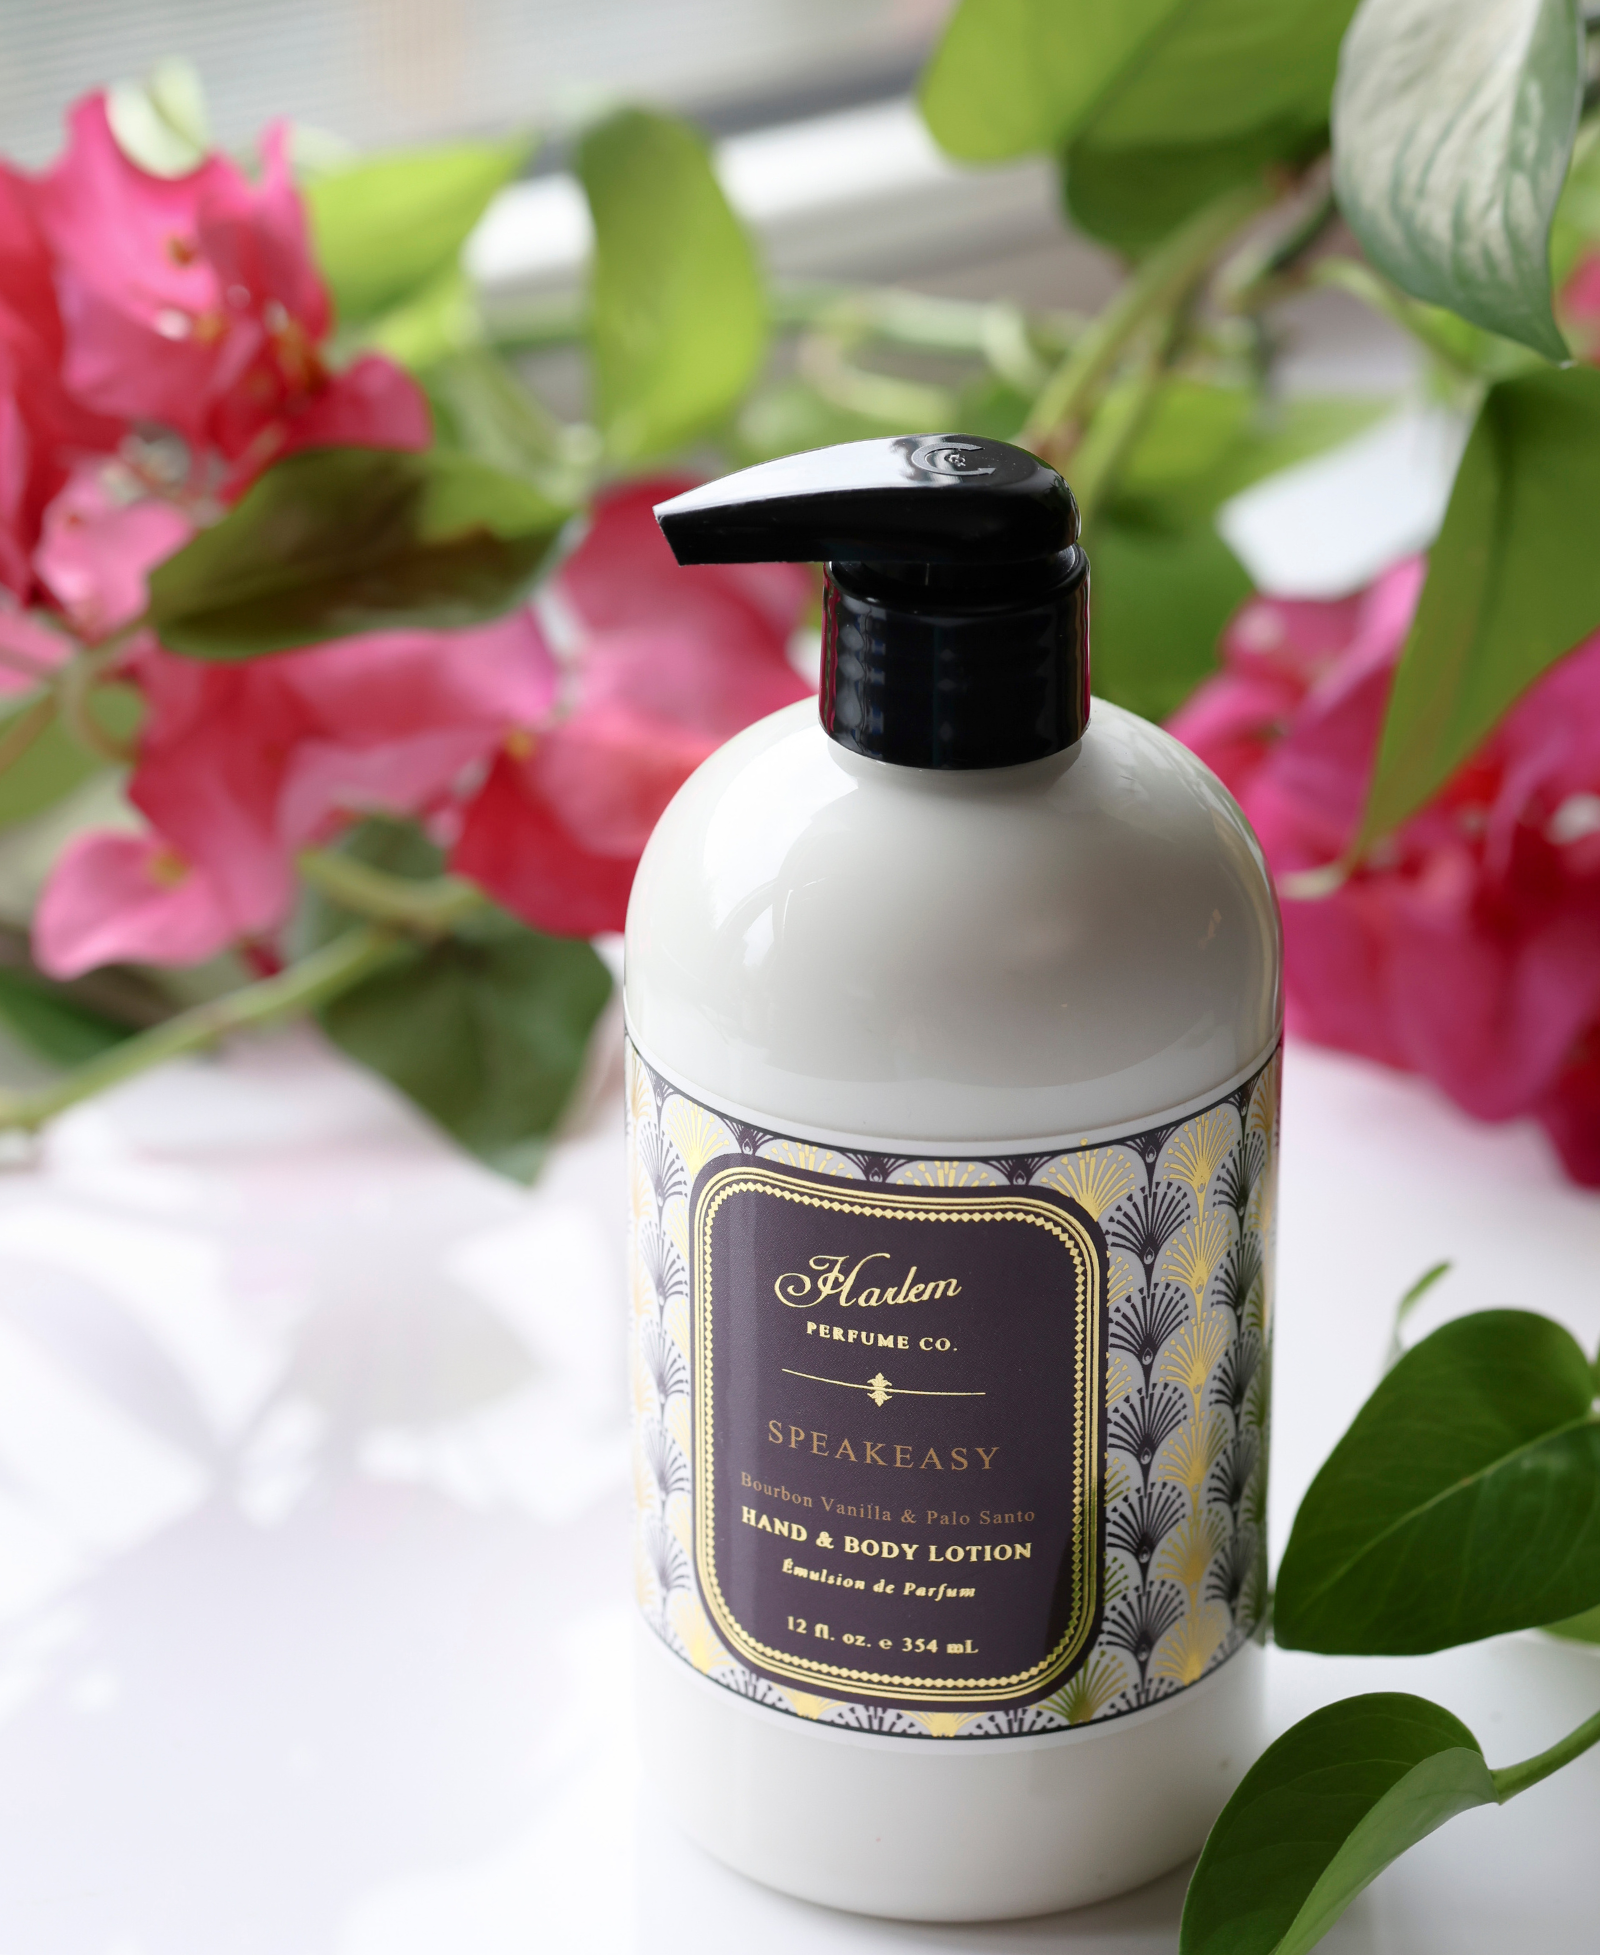 This is an image of our Speakeasy lotion pictured next to pink flowers.  The bottle has a black pump and the label has a unique Art Deco print with the details of the lotion